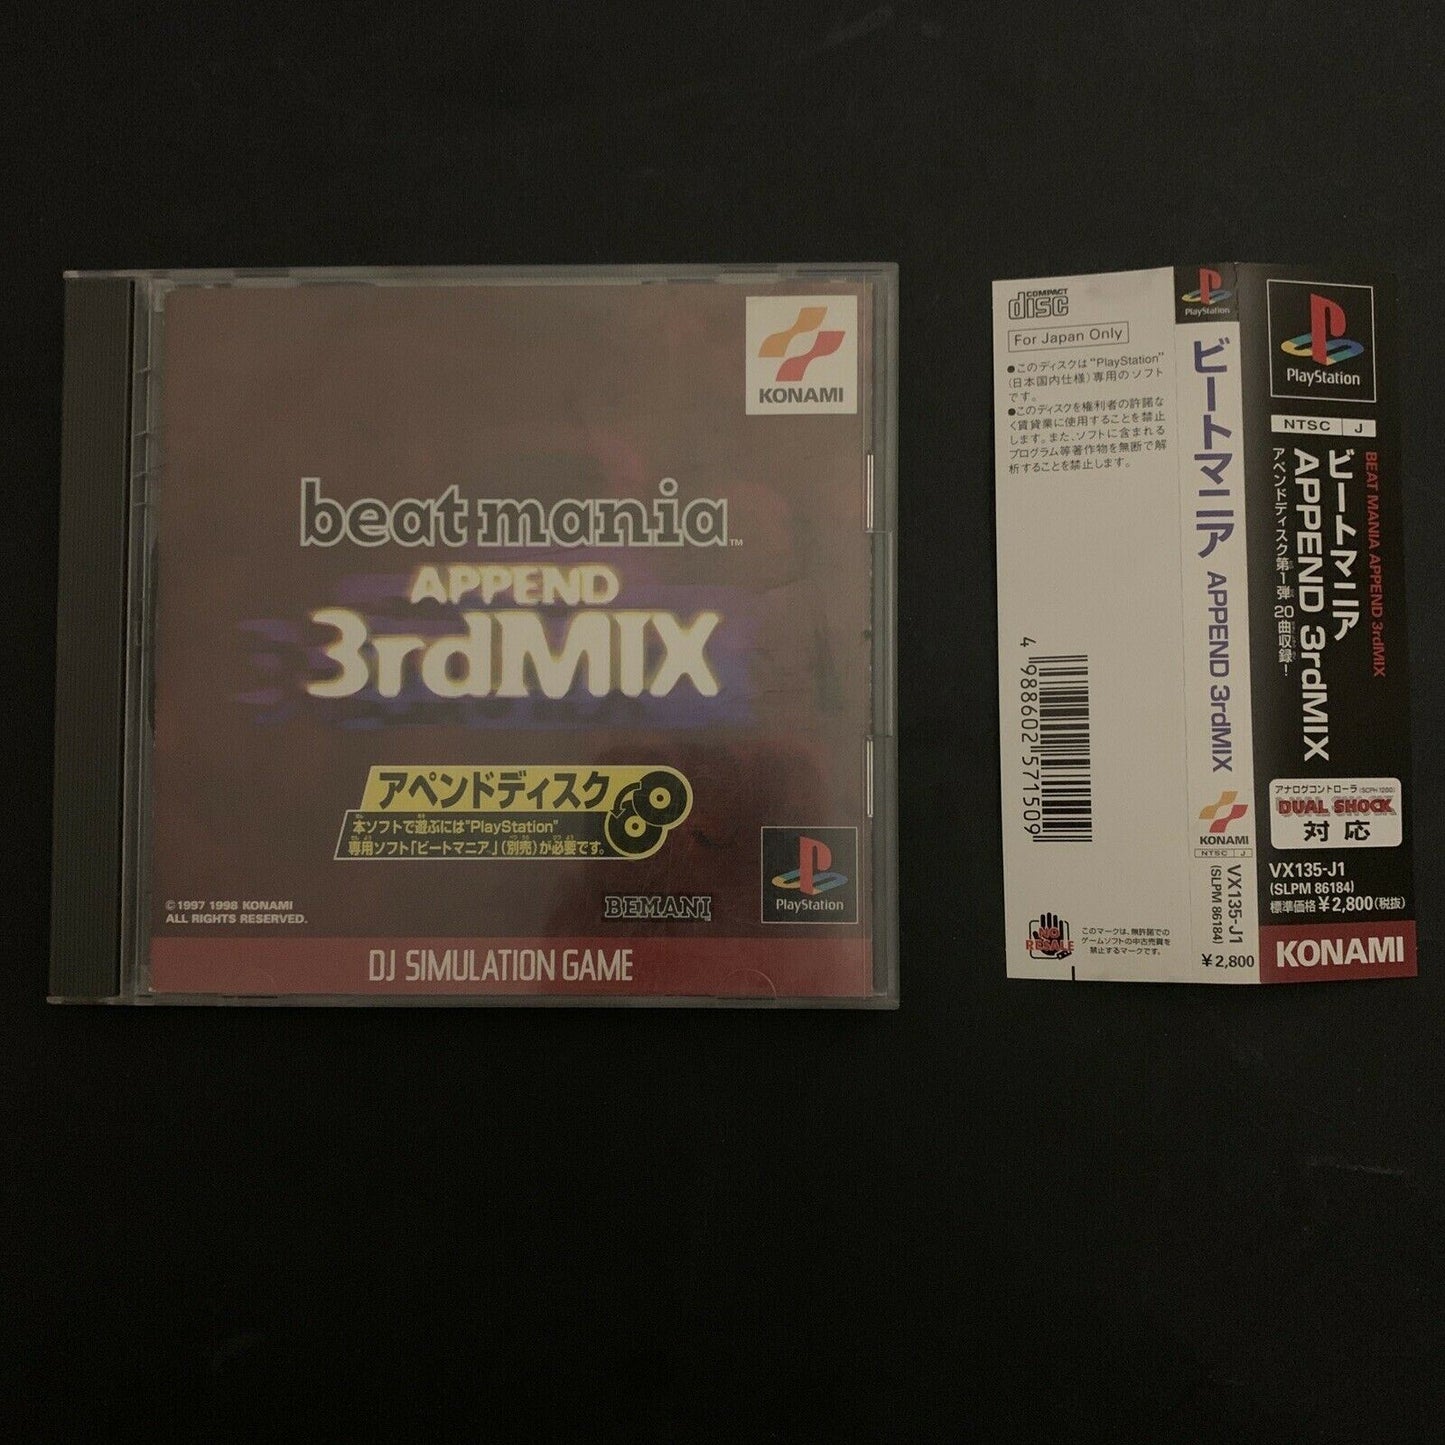 Beatmania: Append 3rd Mix - Playstation PS1 NTSC-J Japan Music Game 1998